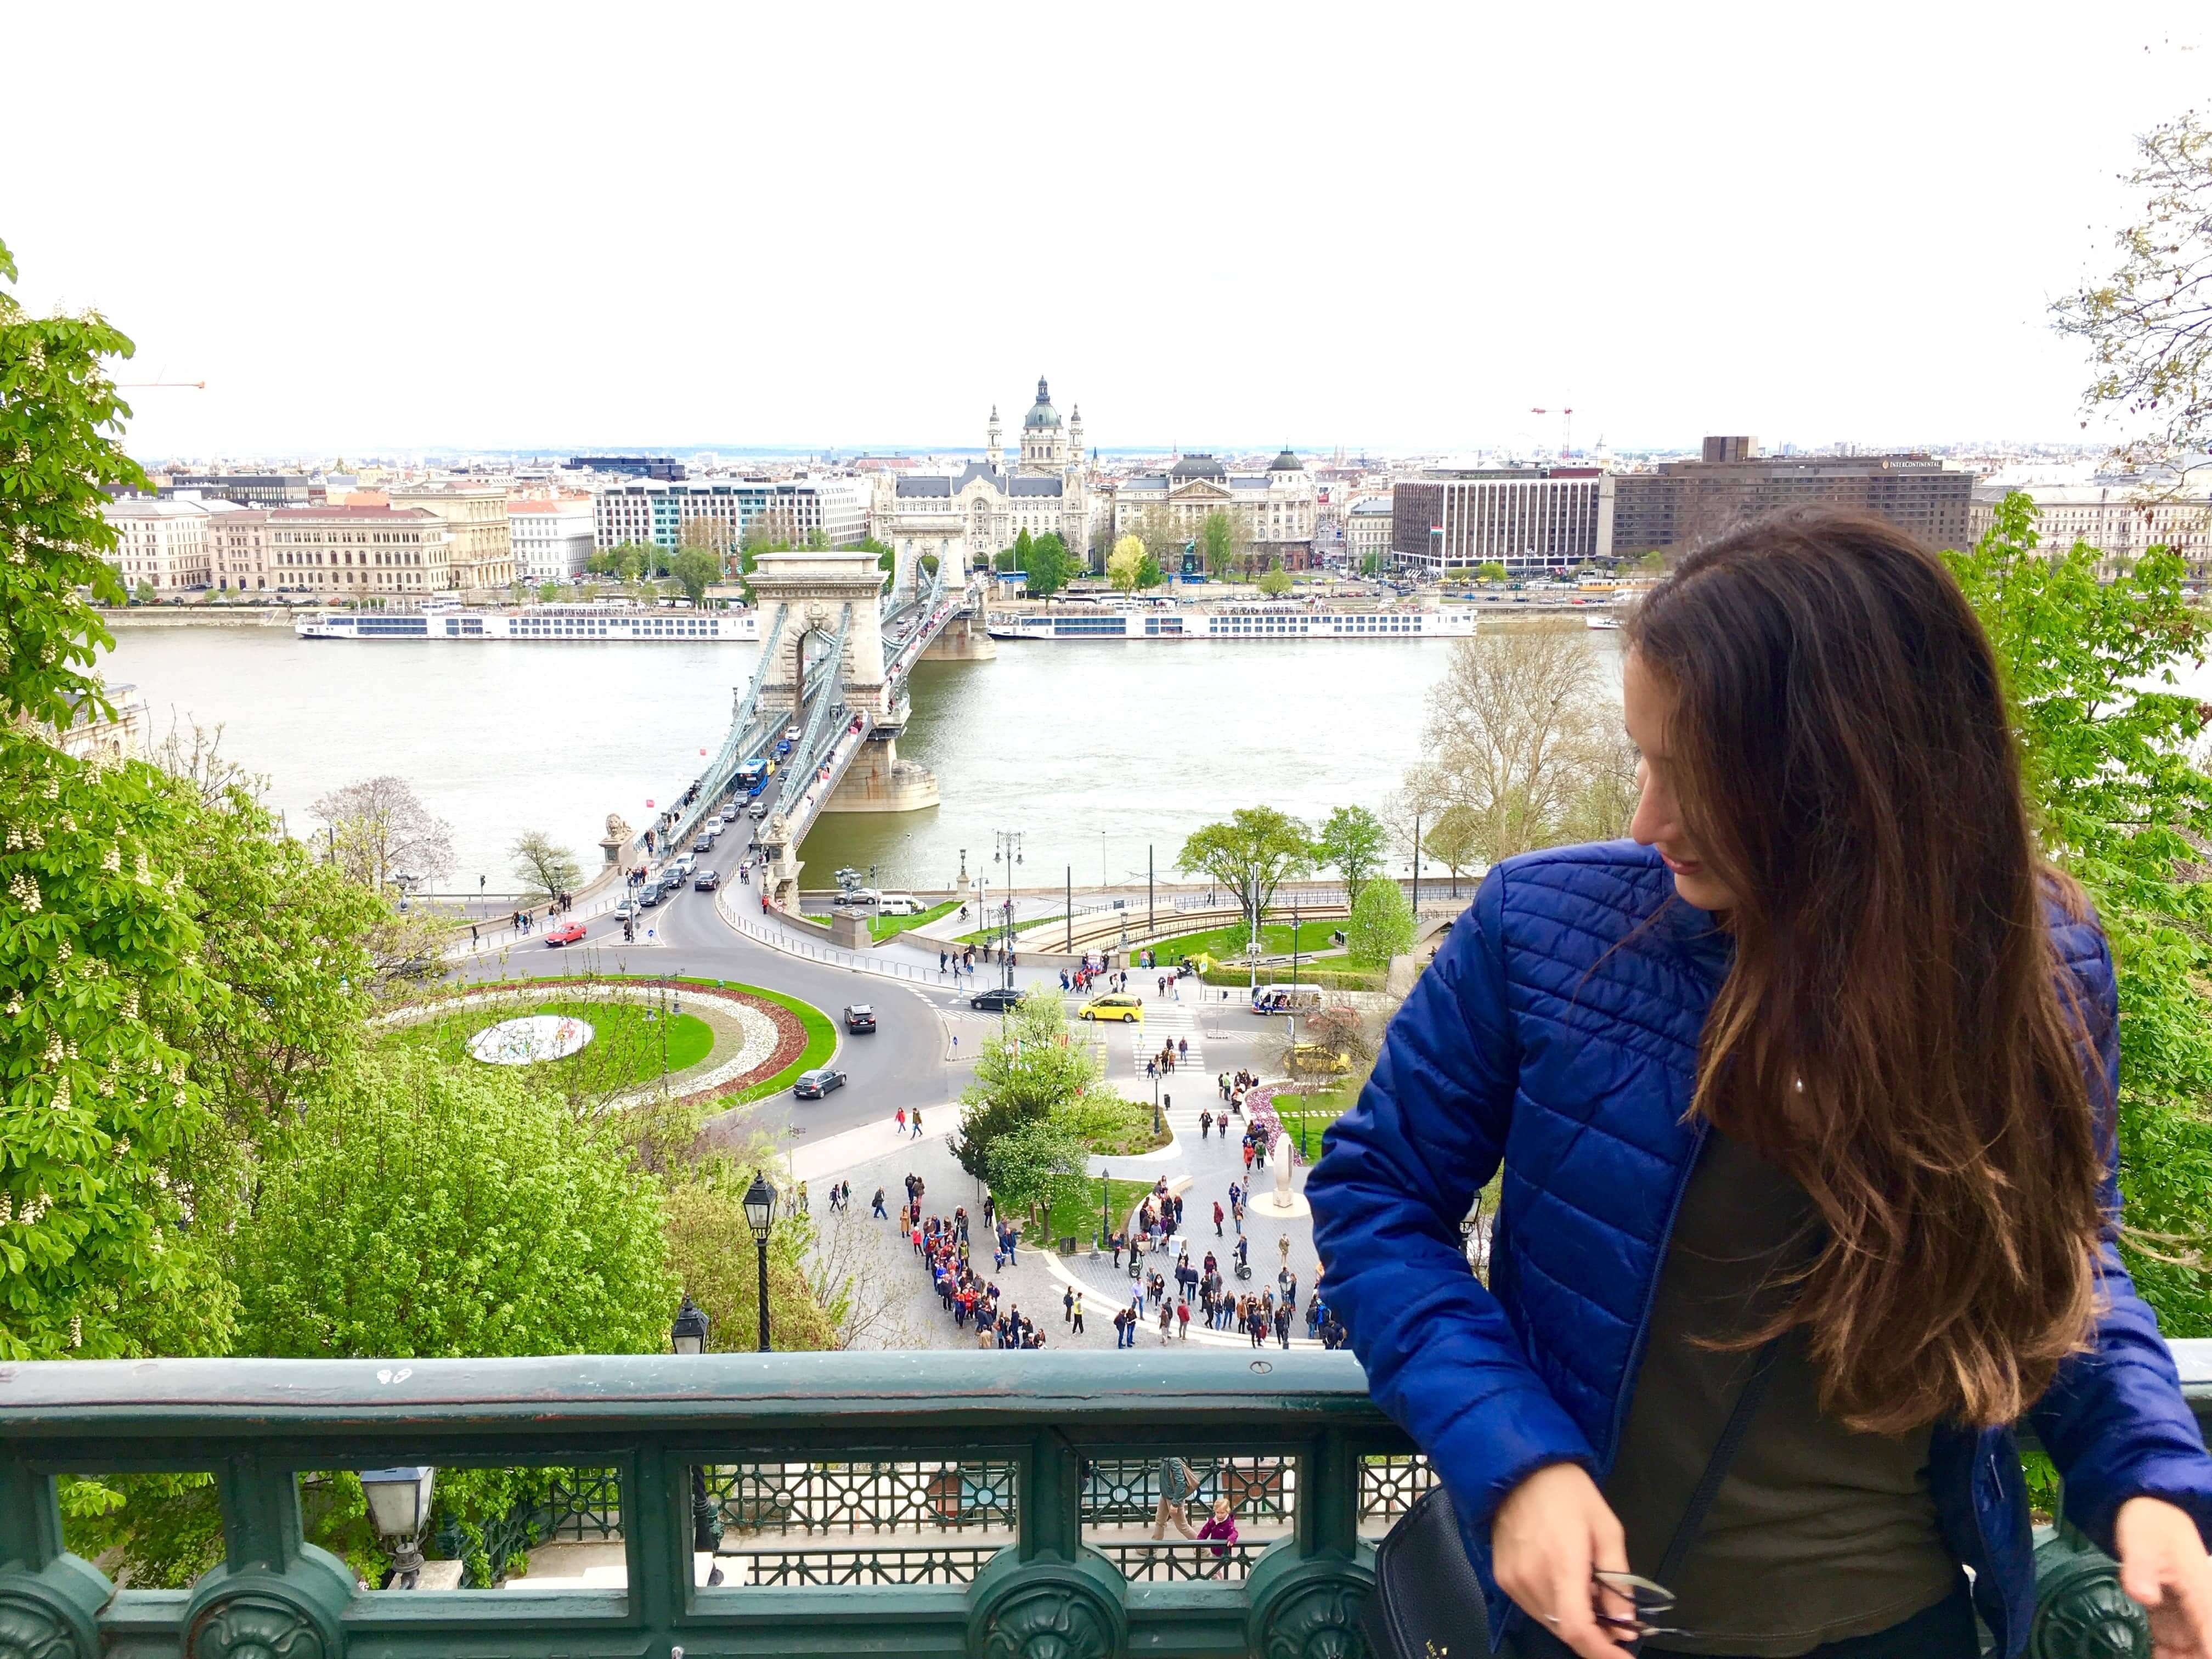 My Top European Cities: Time for a European Adventure | Bad with Directions | Summer is coming! Is Europe somewhere on your list? If so, here are my top European city picks that need to be shared and enjoyed. I love these cities and want others to enjoy them too!